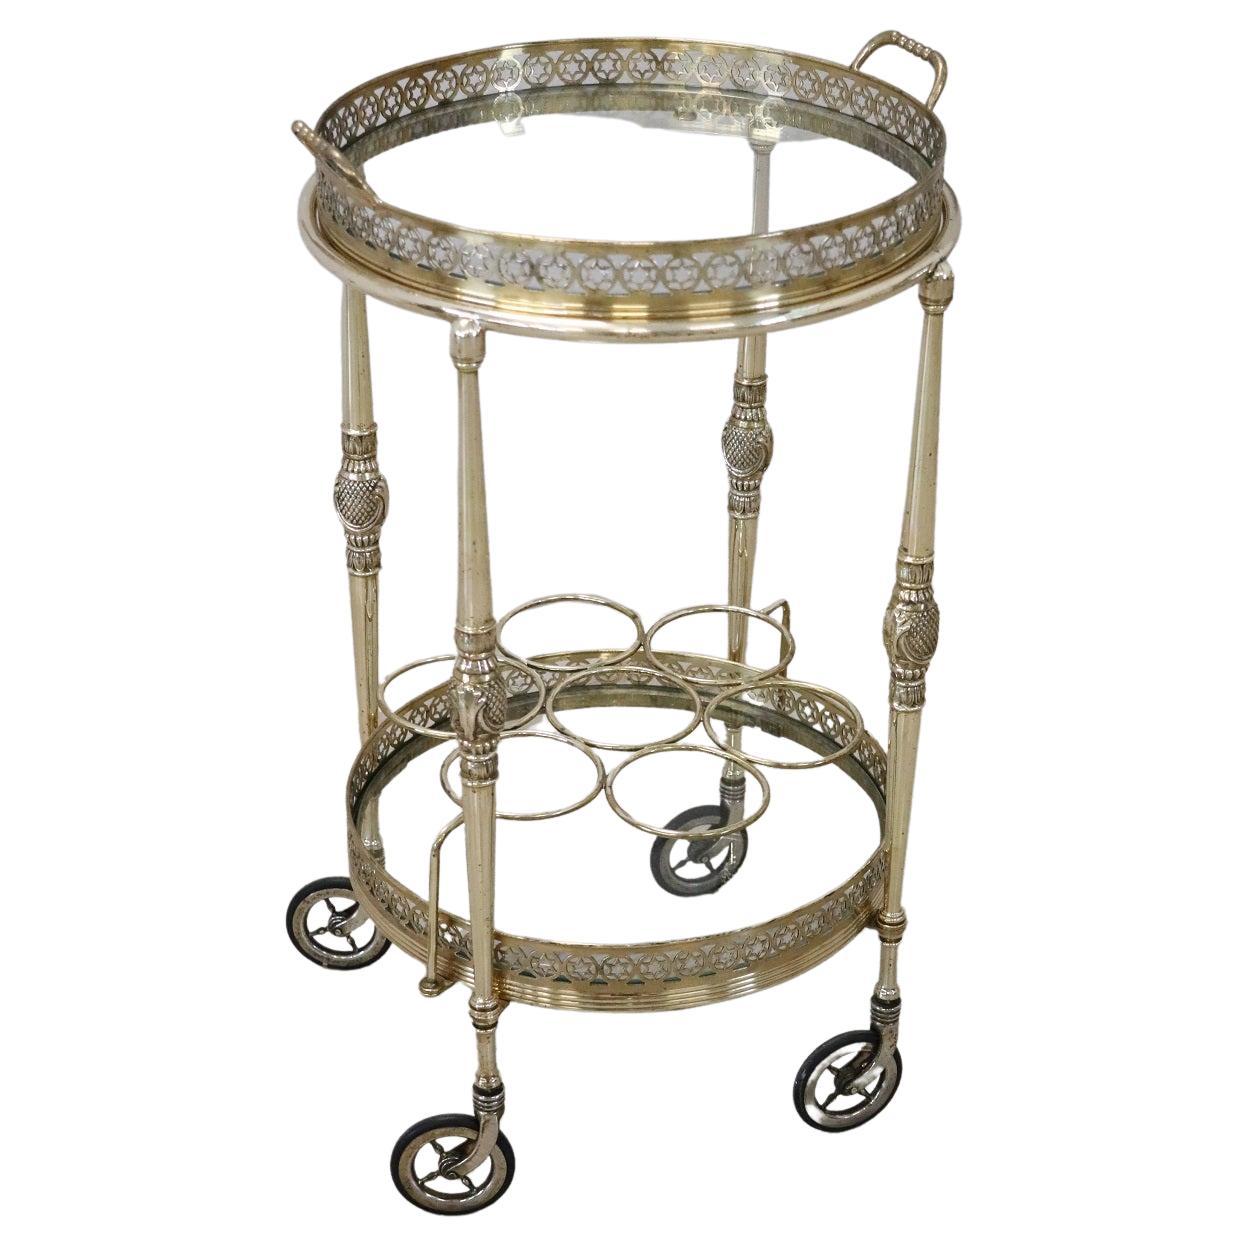 Italian Brass and Glass Drinks Trolley or Bar Cart, 1980s Equipped with Tray